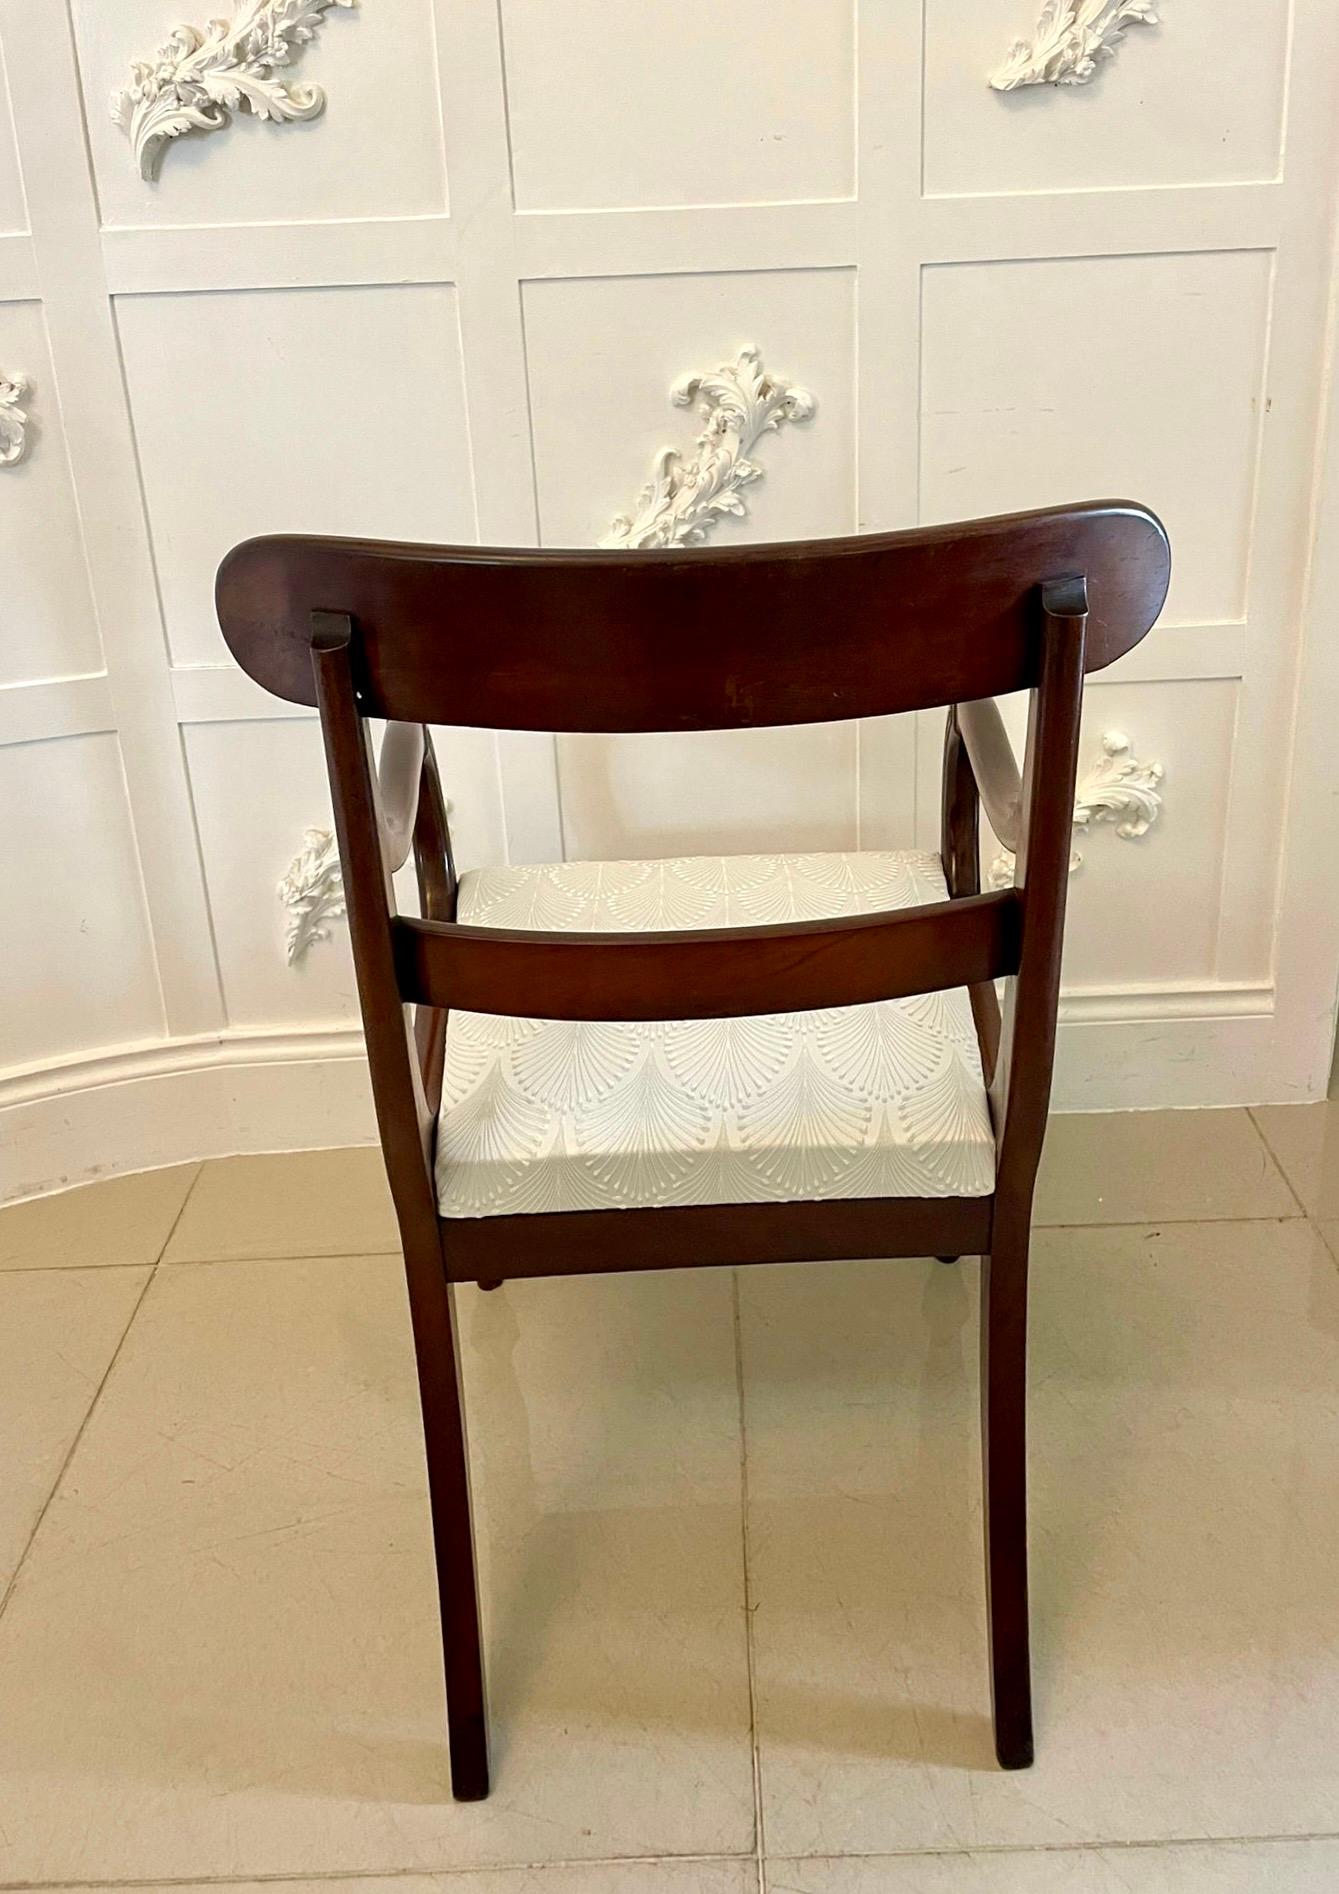 Antique Regency quality mahogany desk chair having a quality figured mahogany top rail and centre splat, elegant carved mahogany shaped open arm, newly reupholstered drop in seat in a quality fabric standing on turned tapering legs to the front and